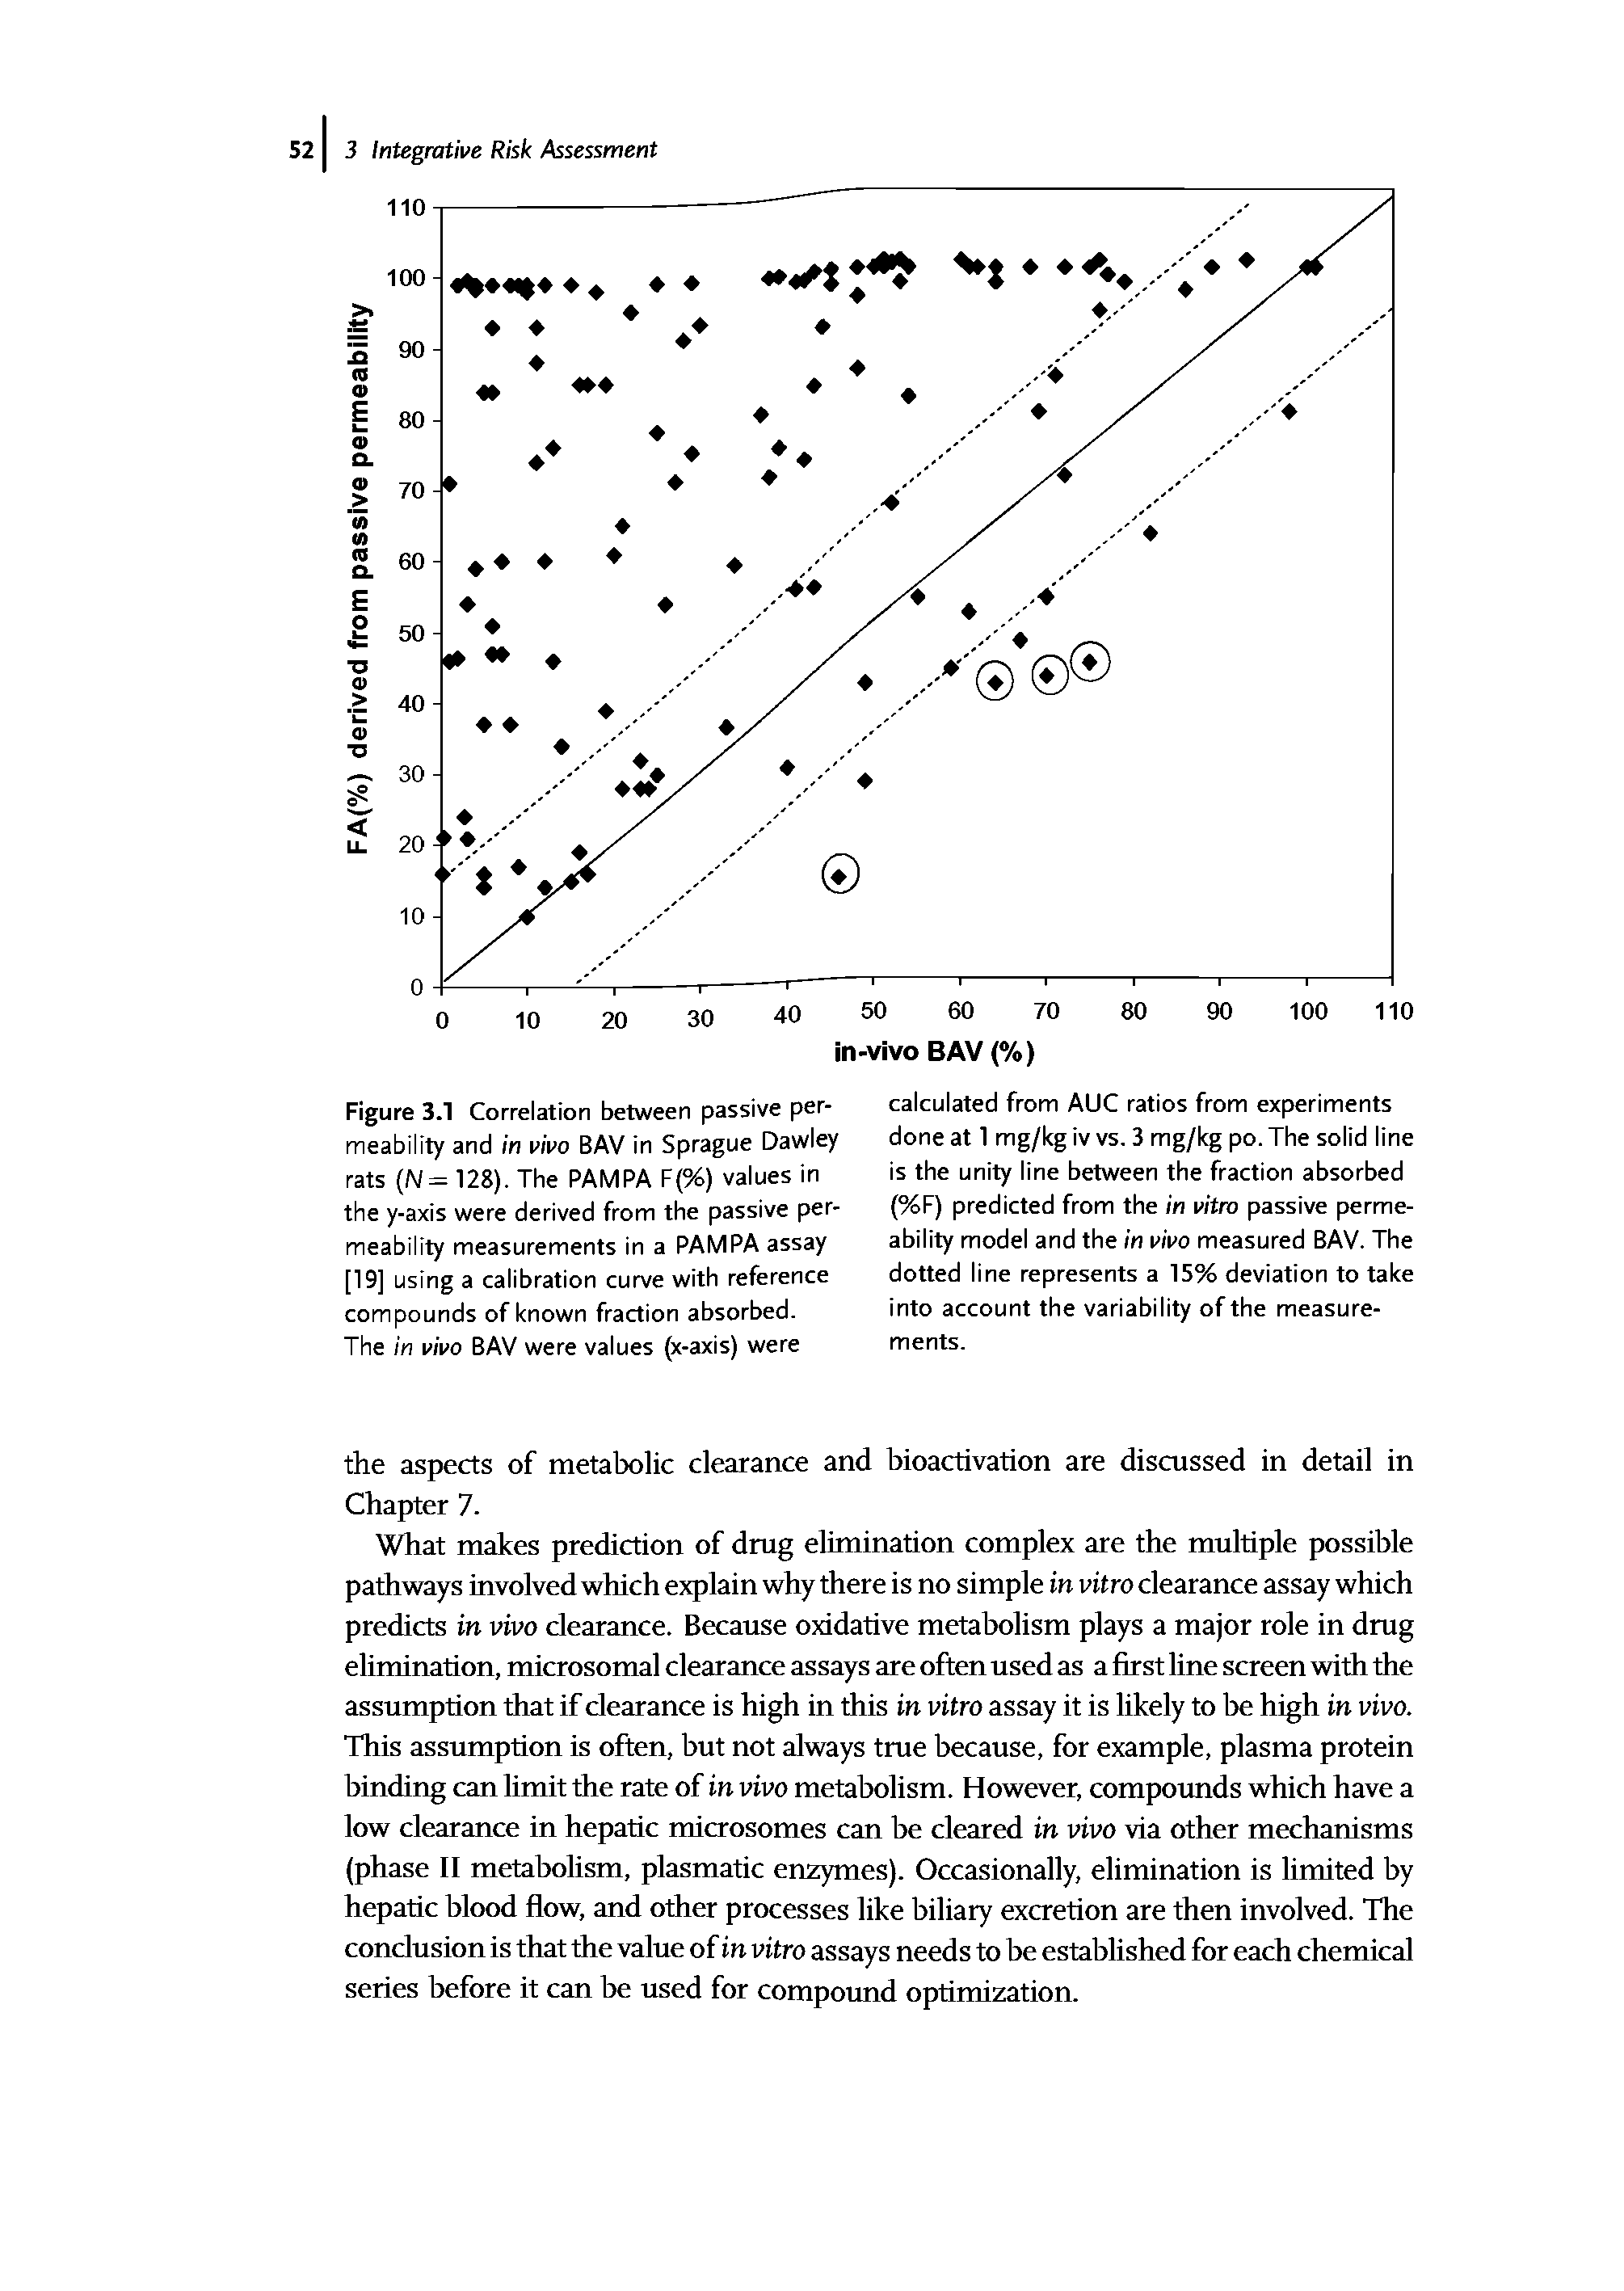 Figure 3.1 Correlation between passive permeability and in vivo BAV in Sprague Dawley rats (N=m). The PAMPA F(%) values in the y-axis were derived from the passive permeability measurements in a PAMPA assay [19] using a calibration curve with reference compounds of known fraction absorbed.